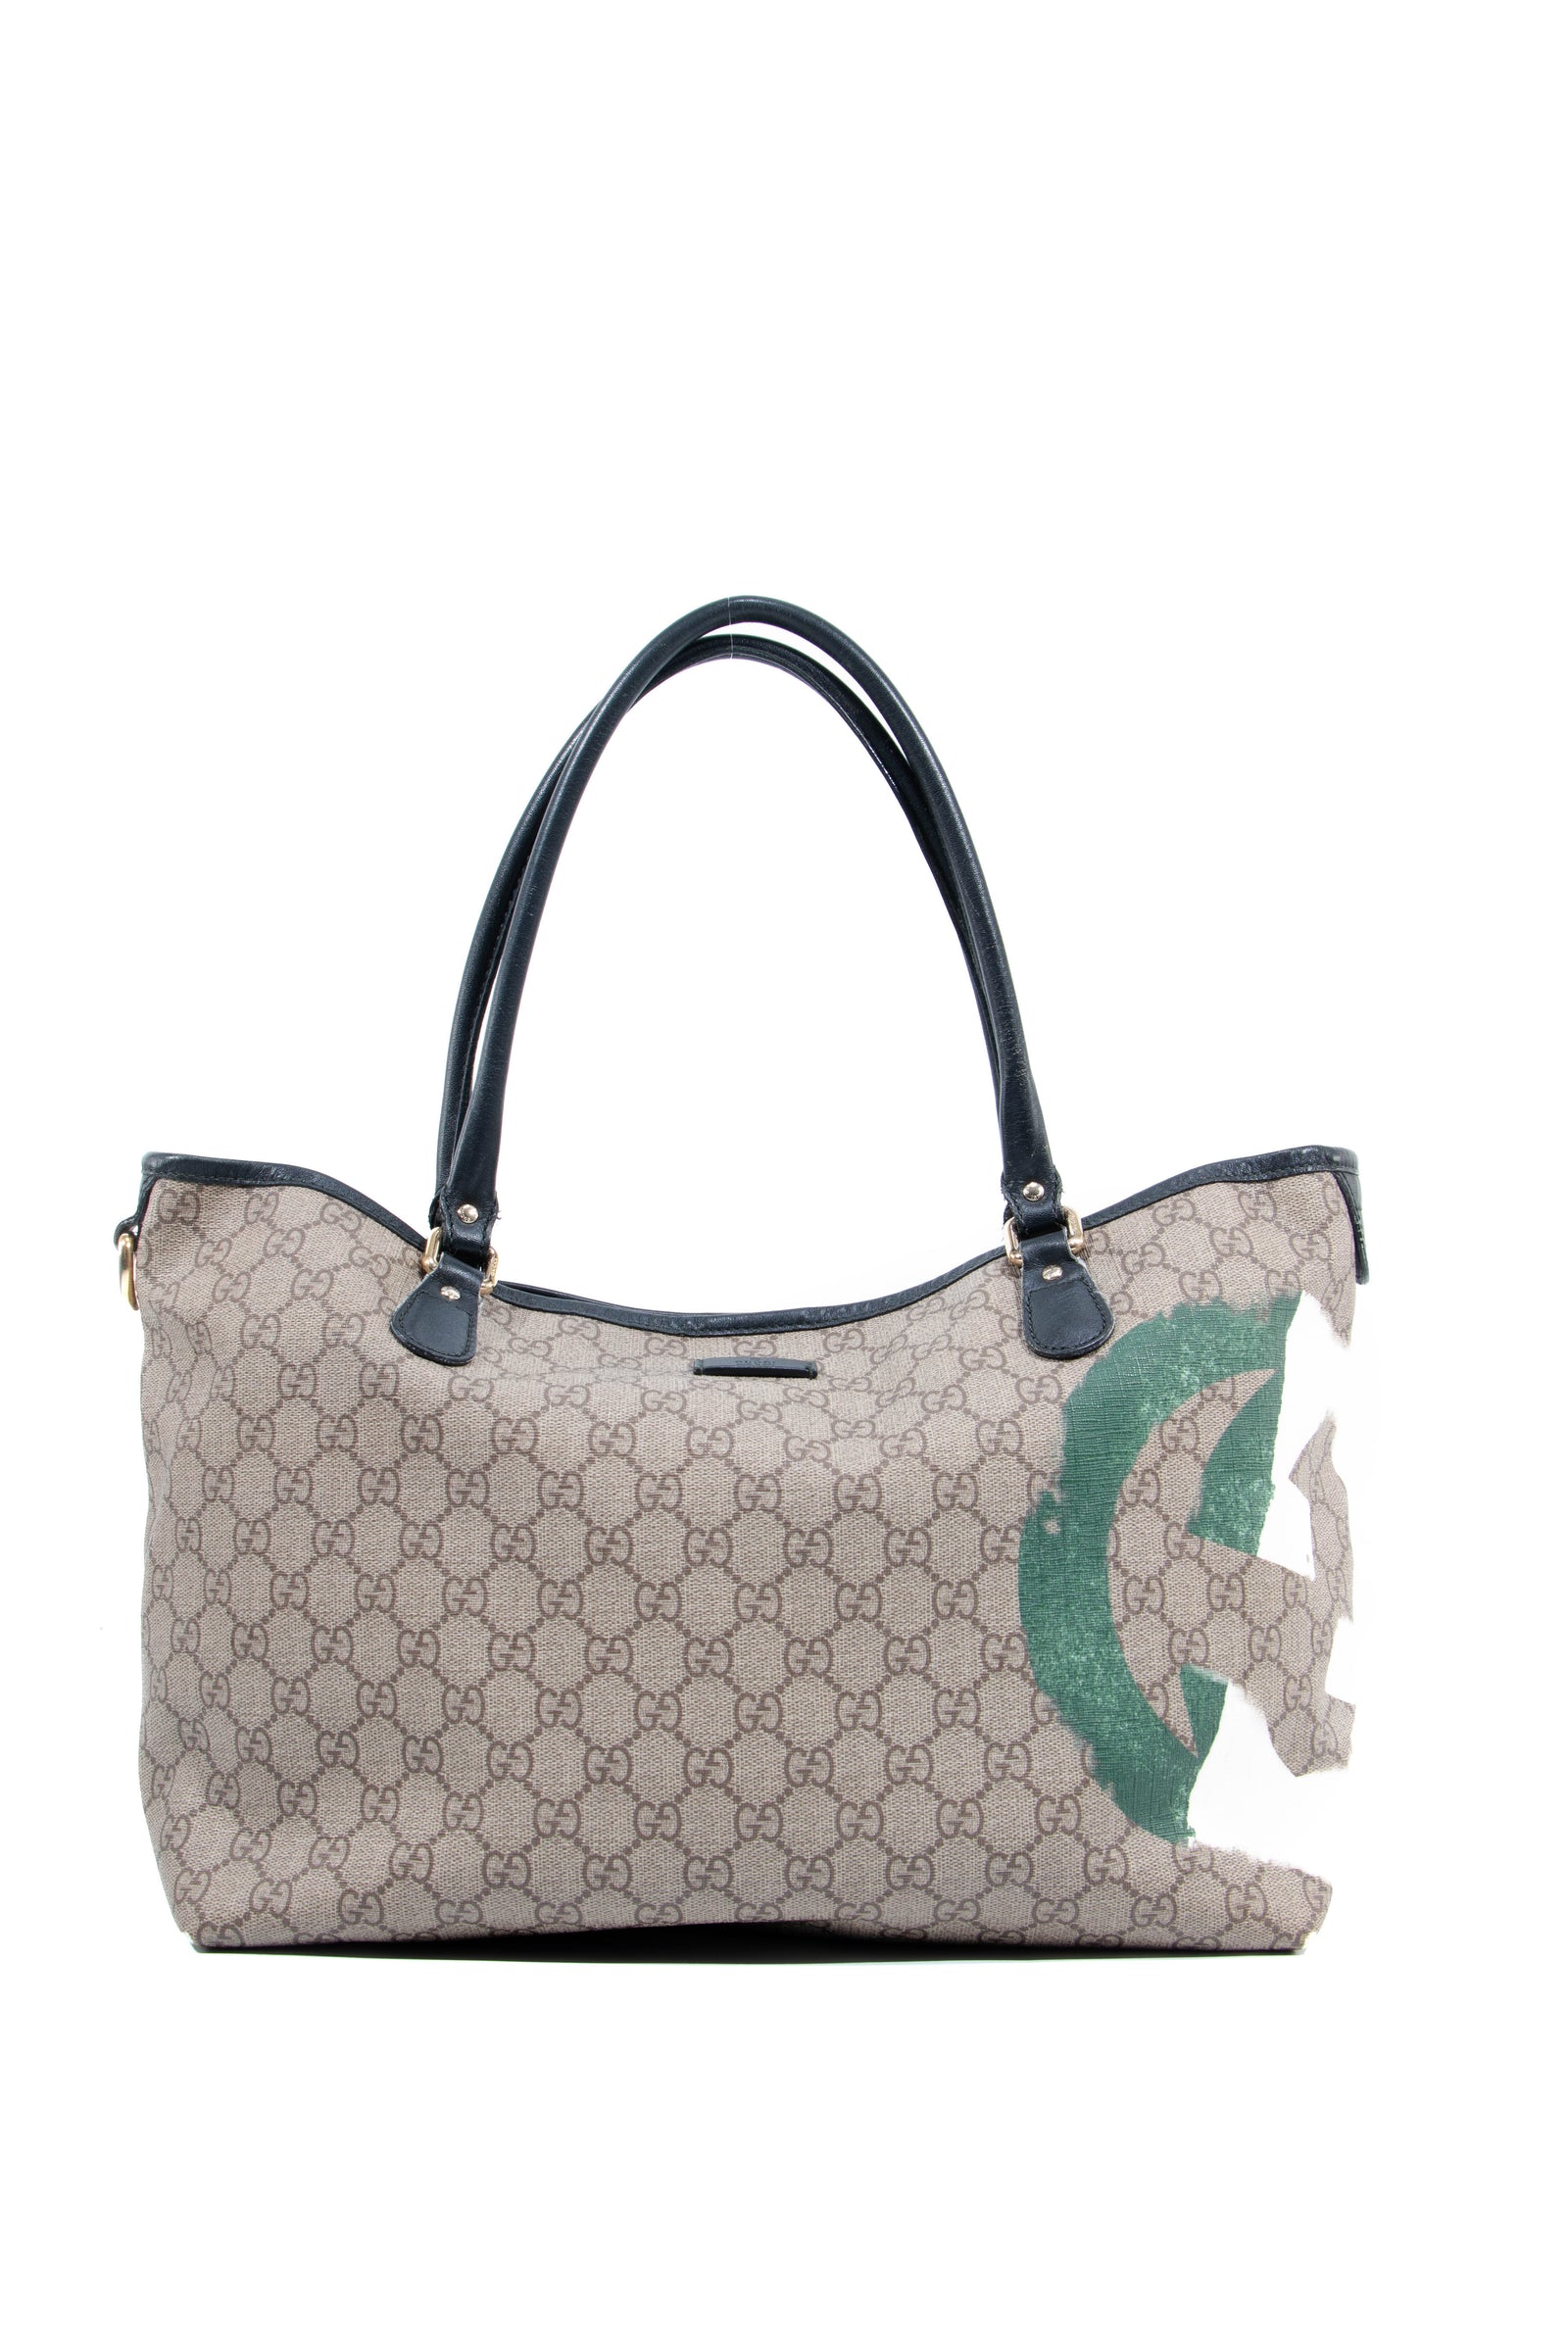 Buy Lv Trunk Online In Pakistan, Hand Bags, Ladies Bags, Side Bags,  Clutches, Wallets, Leather Bags, Purse, Fashion Bags, Tote Bags, Branded  Bags, Backpacks, Wallets, Mobile Wallets, Best Price